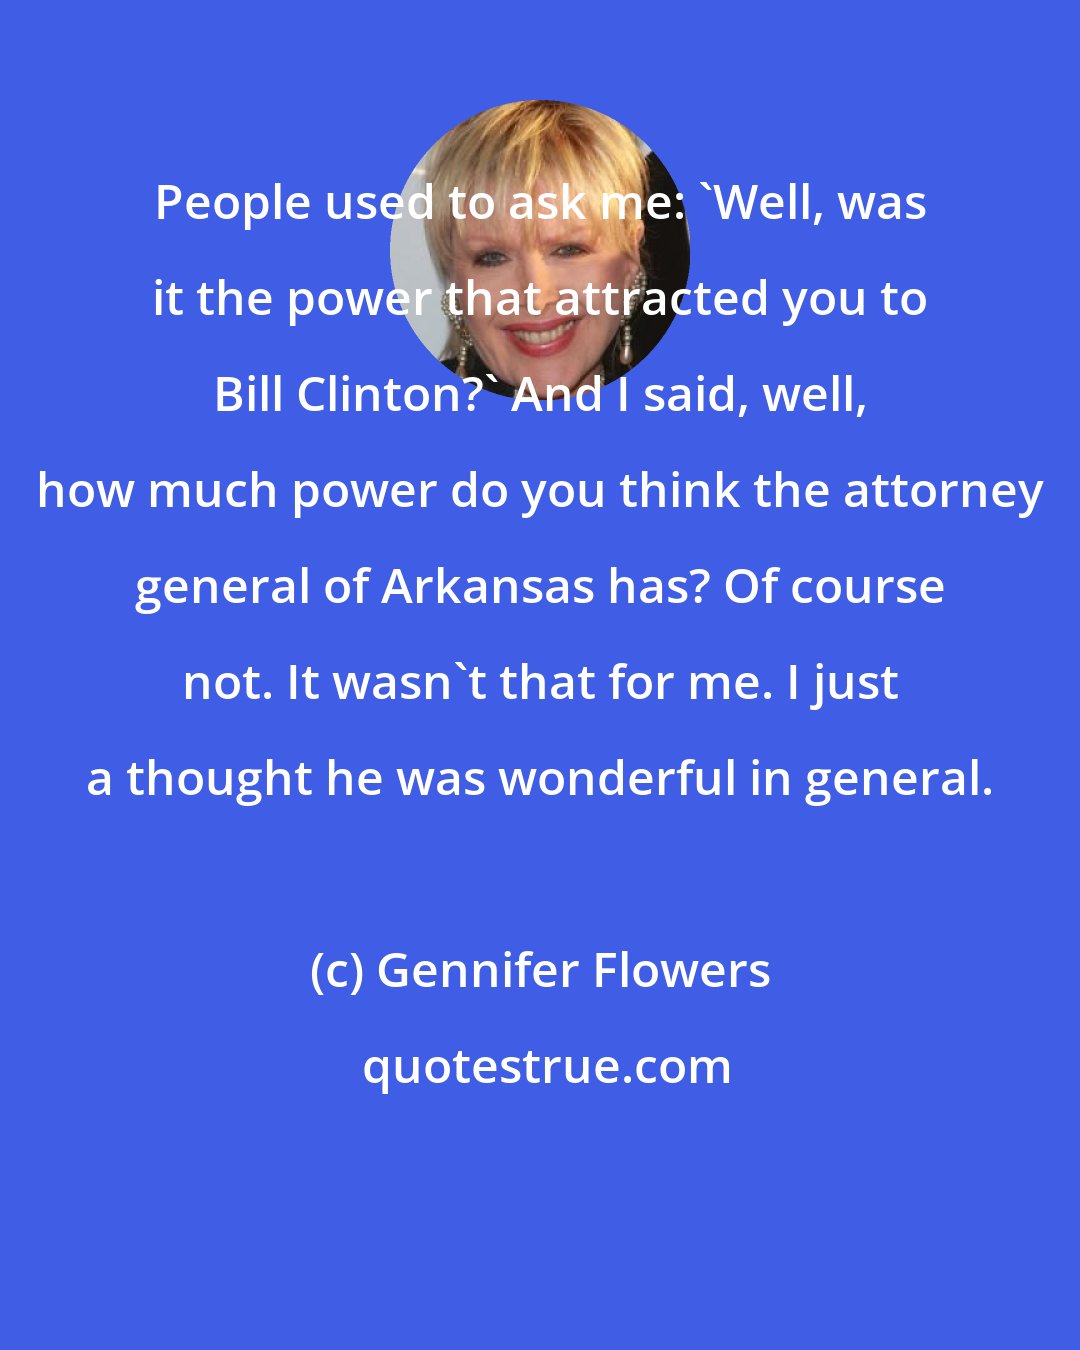 Gennifer Flowers: People used to ask me: 'Well, was it the power that attracted you to Bill Clinton?' And I said, well, how much power do you think the attorney general of Arkansas has? Of course not. It wasn't that for me. I just a thought he was wonderful in general.